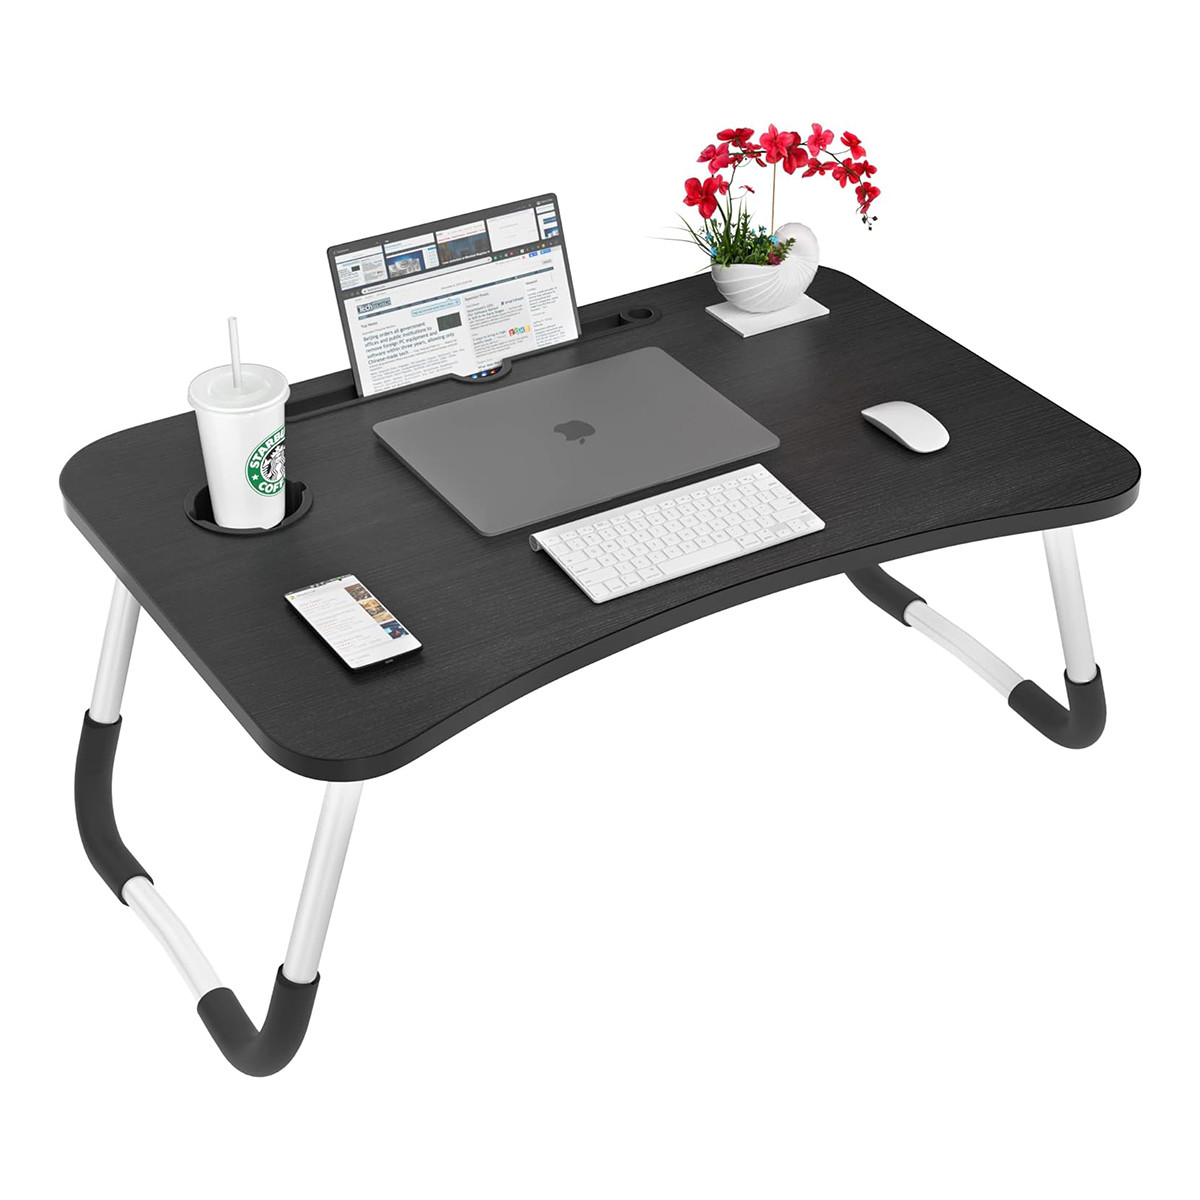 Portable Foldable Home Laptop/Notebook Stand Desk/Study Table - Laptop Stand - Black Color